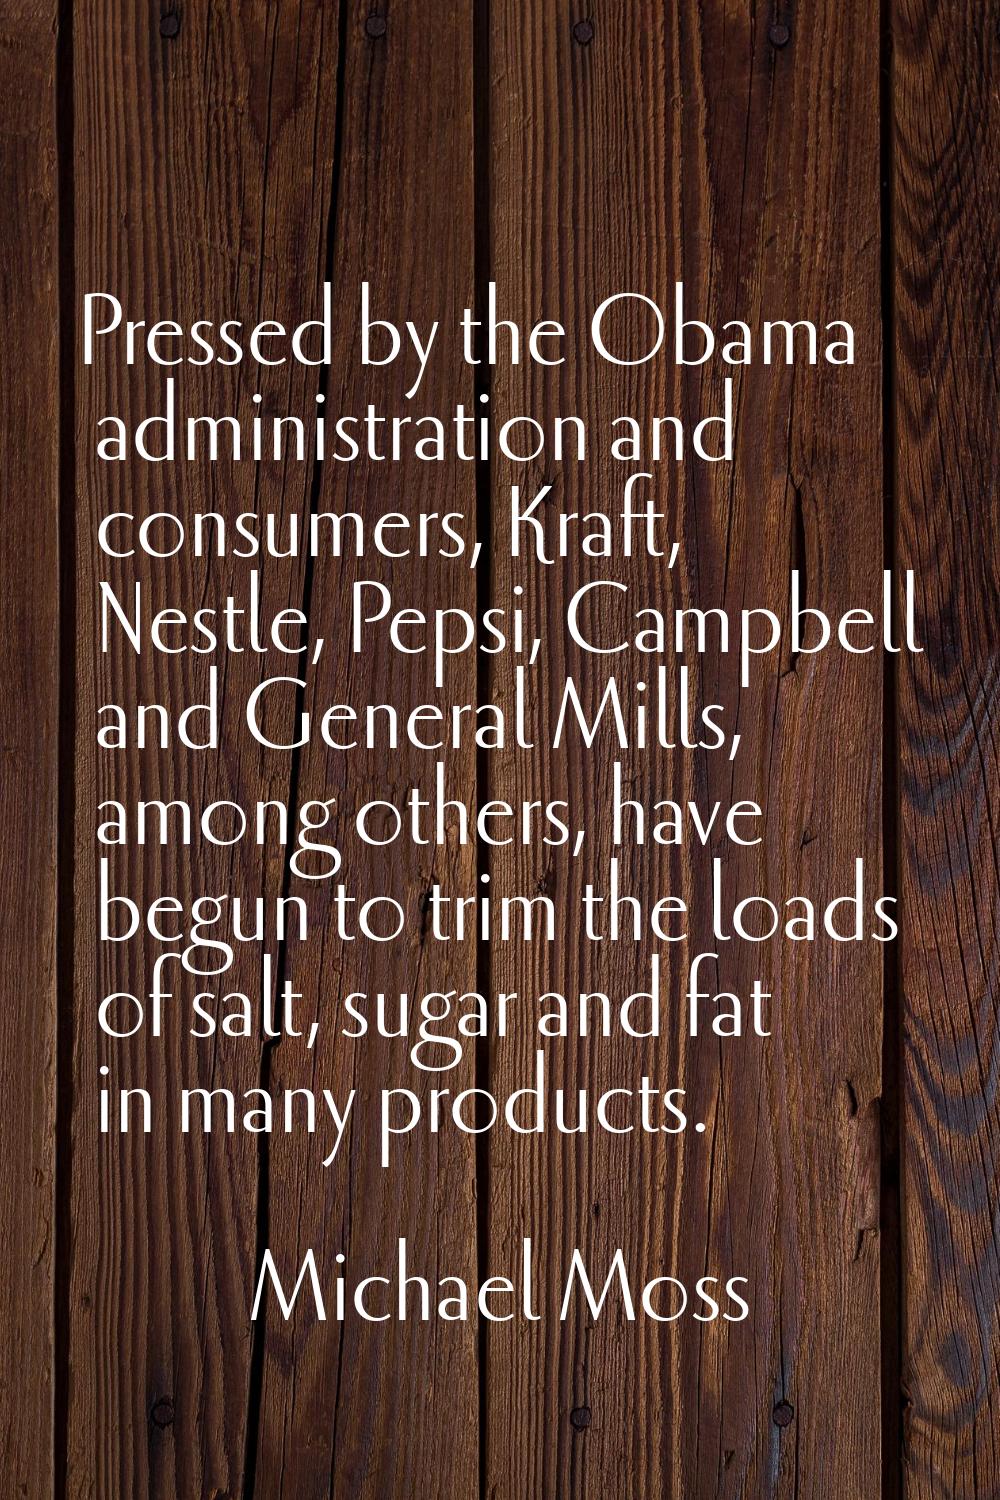 Pressed by the Obama administration and consumers, Kraft, Nestle, Pepsi, Campbell and General Mills